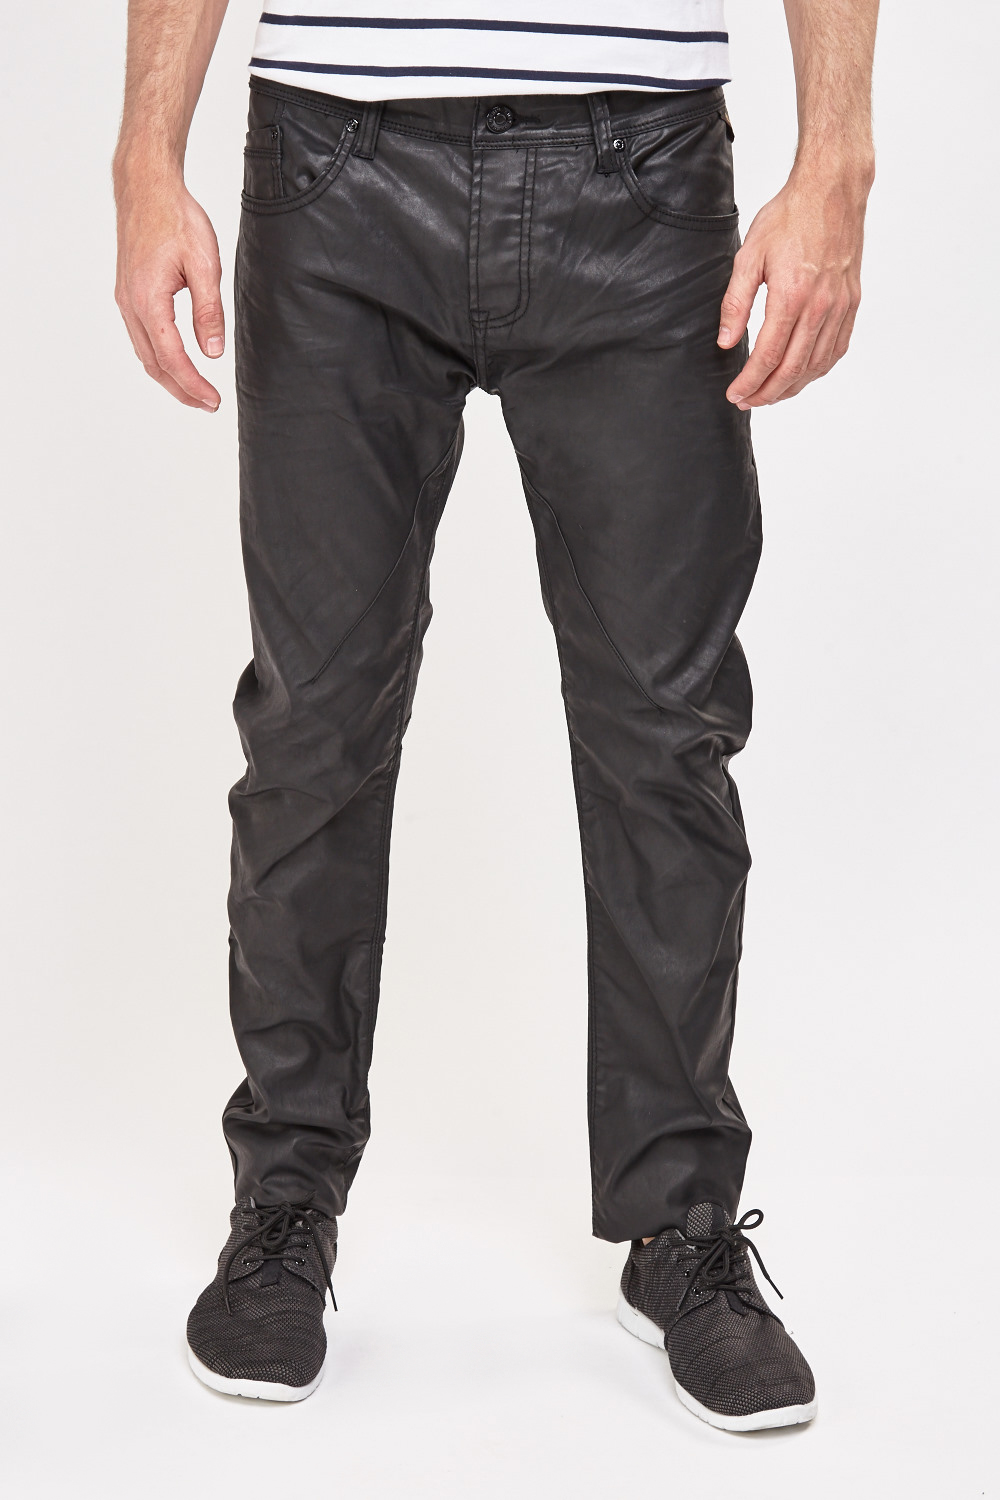 Mens Waxed Black Jeans - Just $7